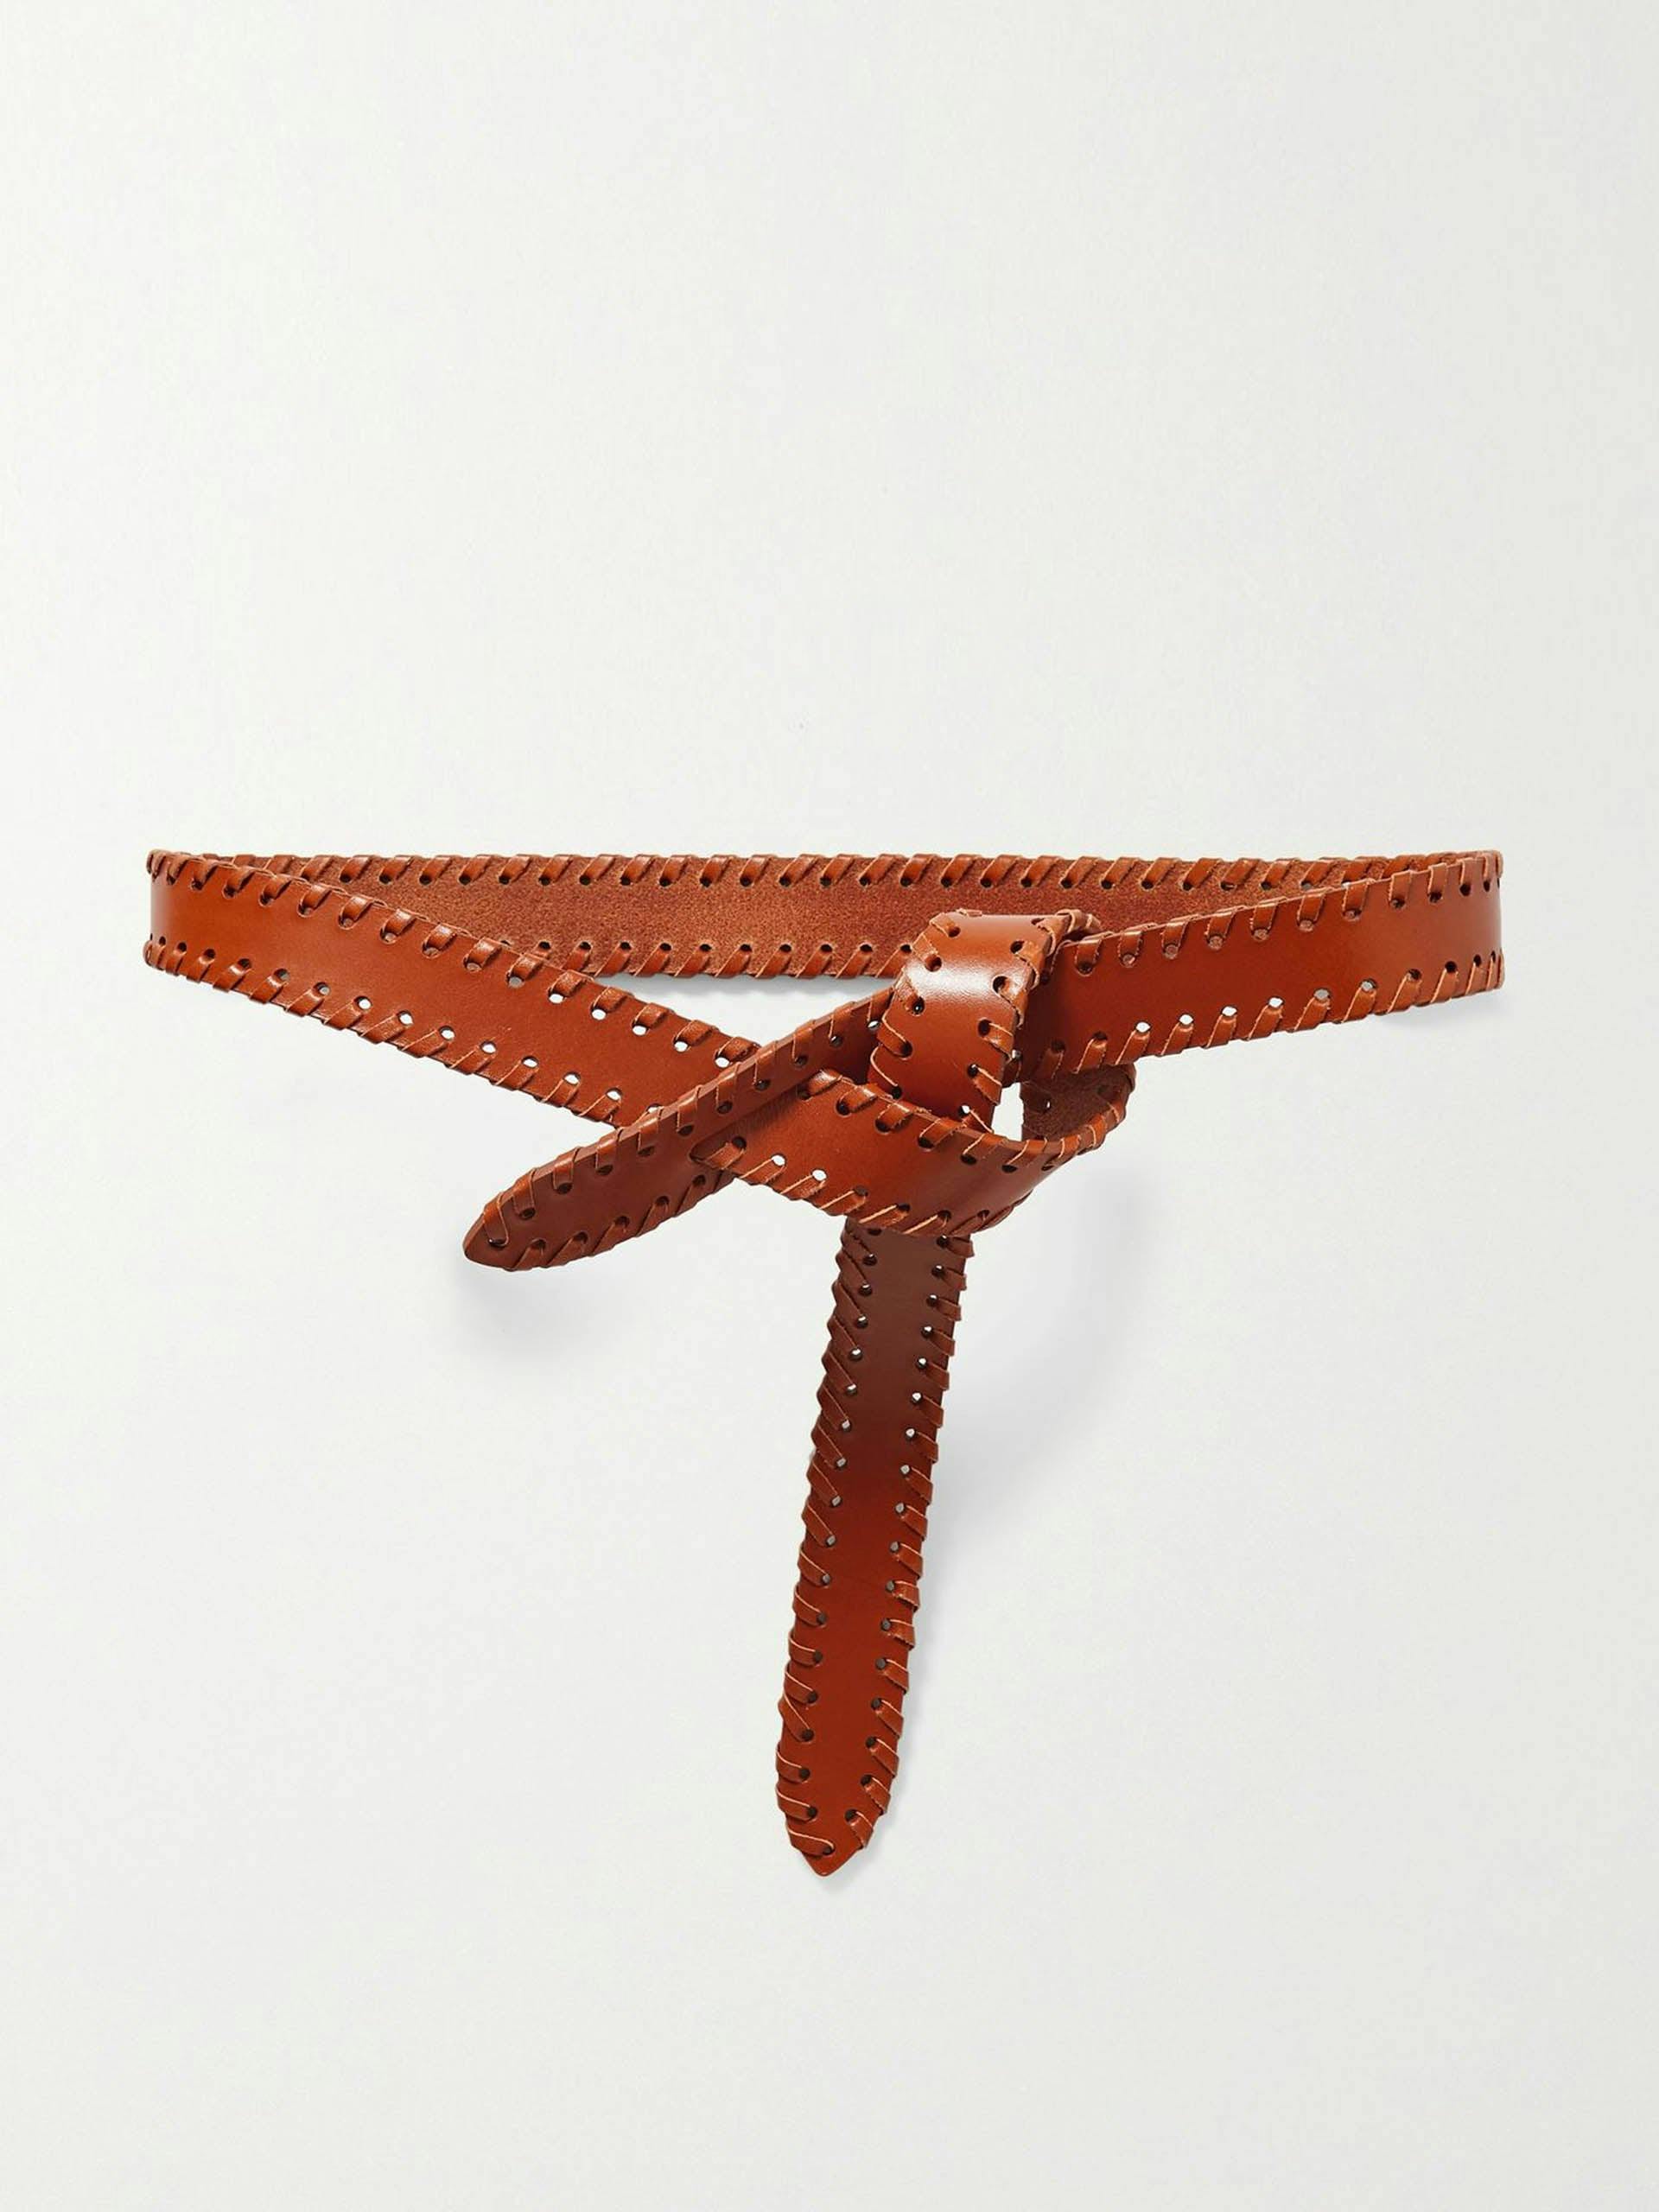 Brown whipstitched leather Lecce belt